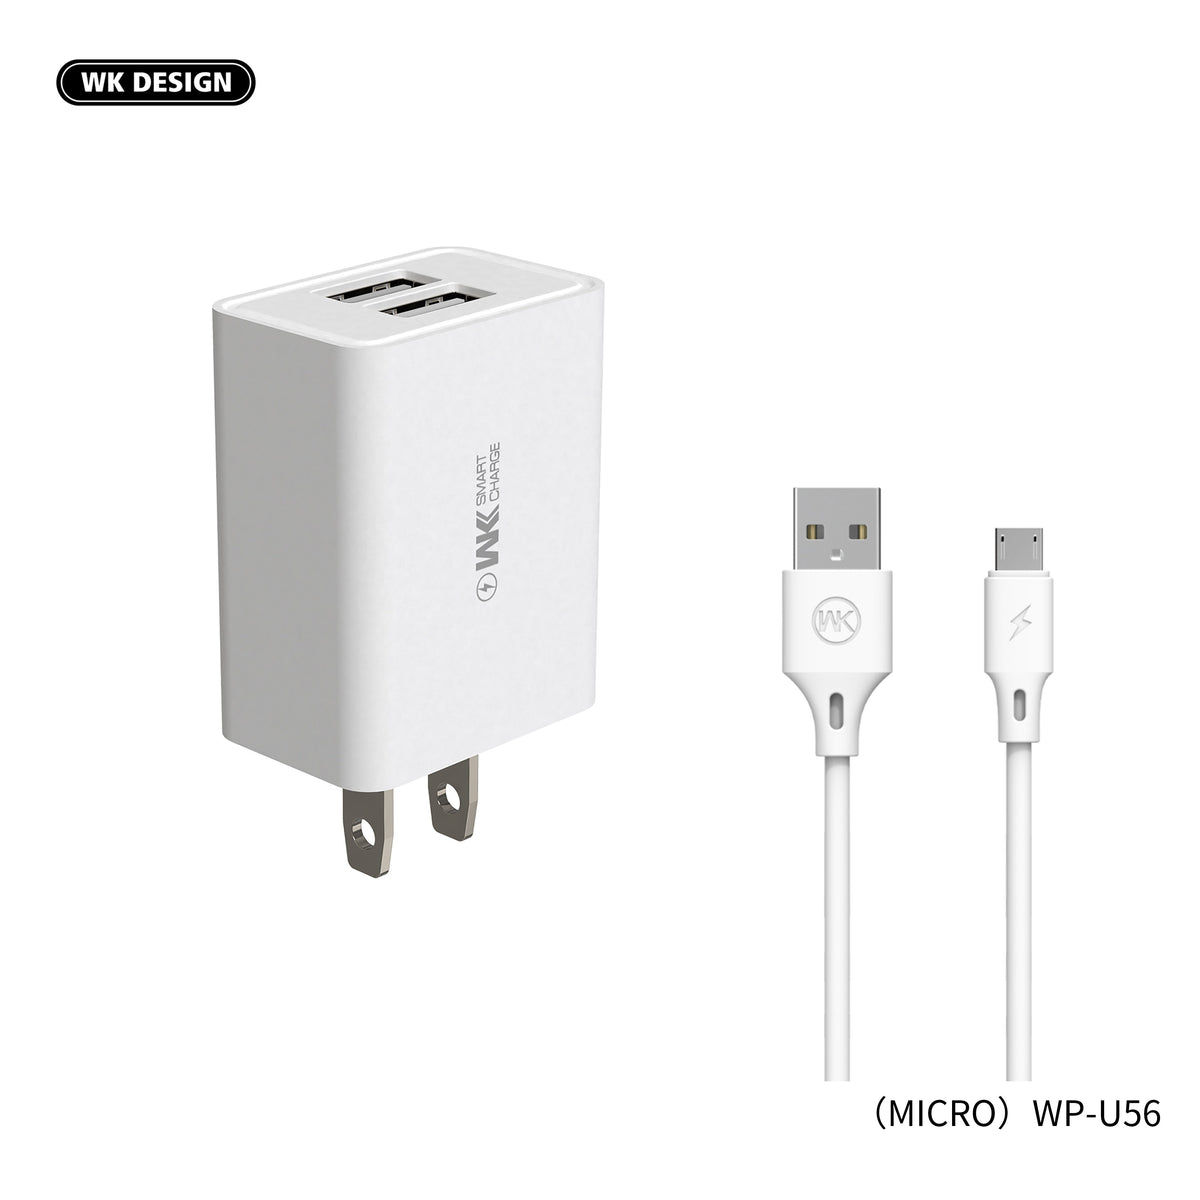 WK WP U56M Dual USB Charger For Micro - White